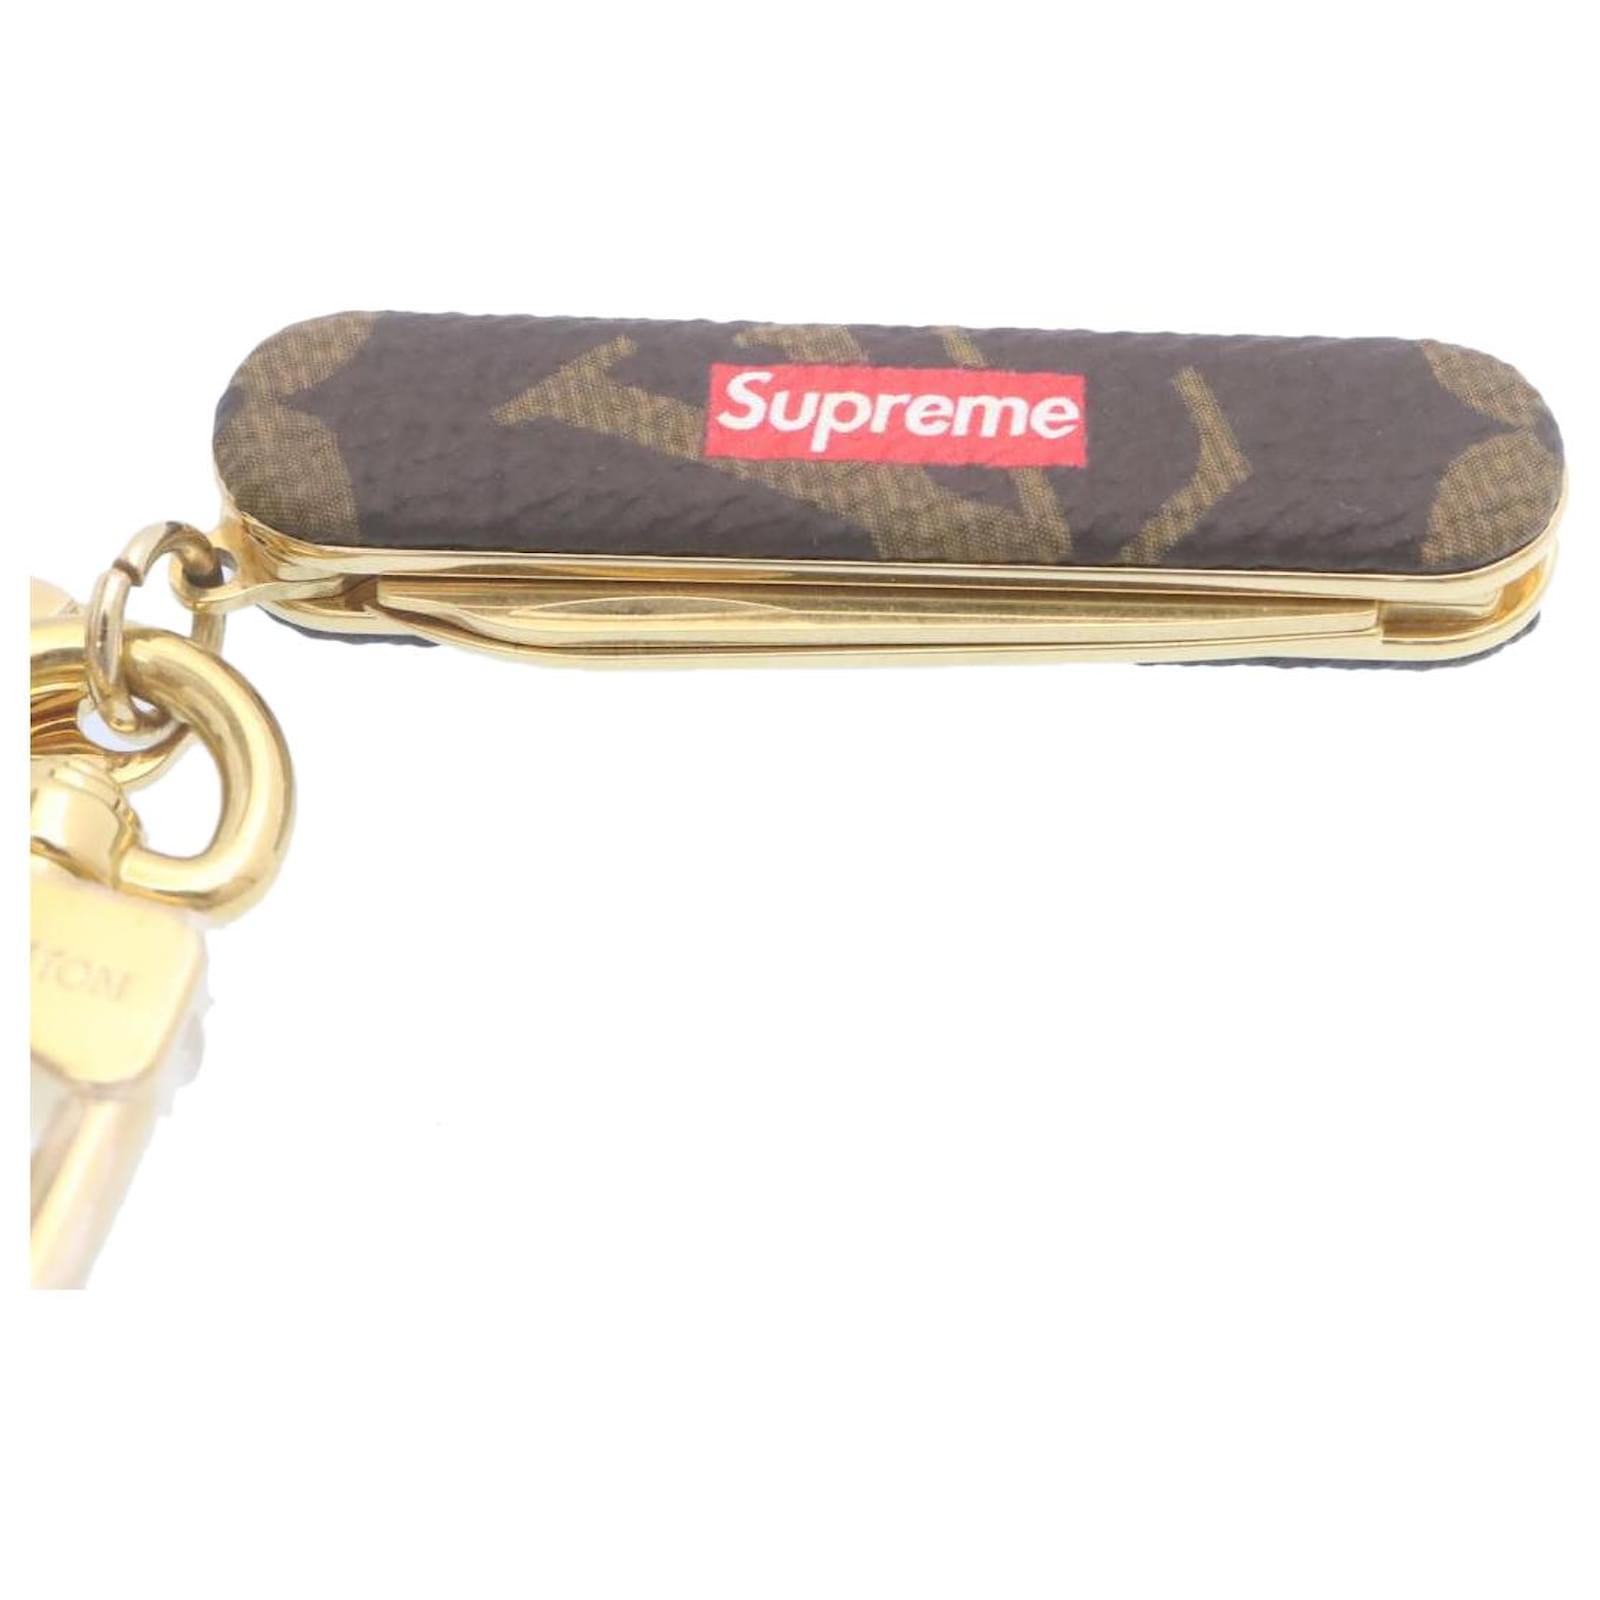 Louis Vuitton X Supreme Pocket Knife Keychain Available For